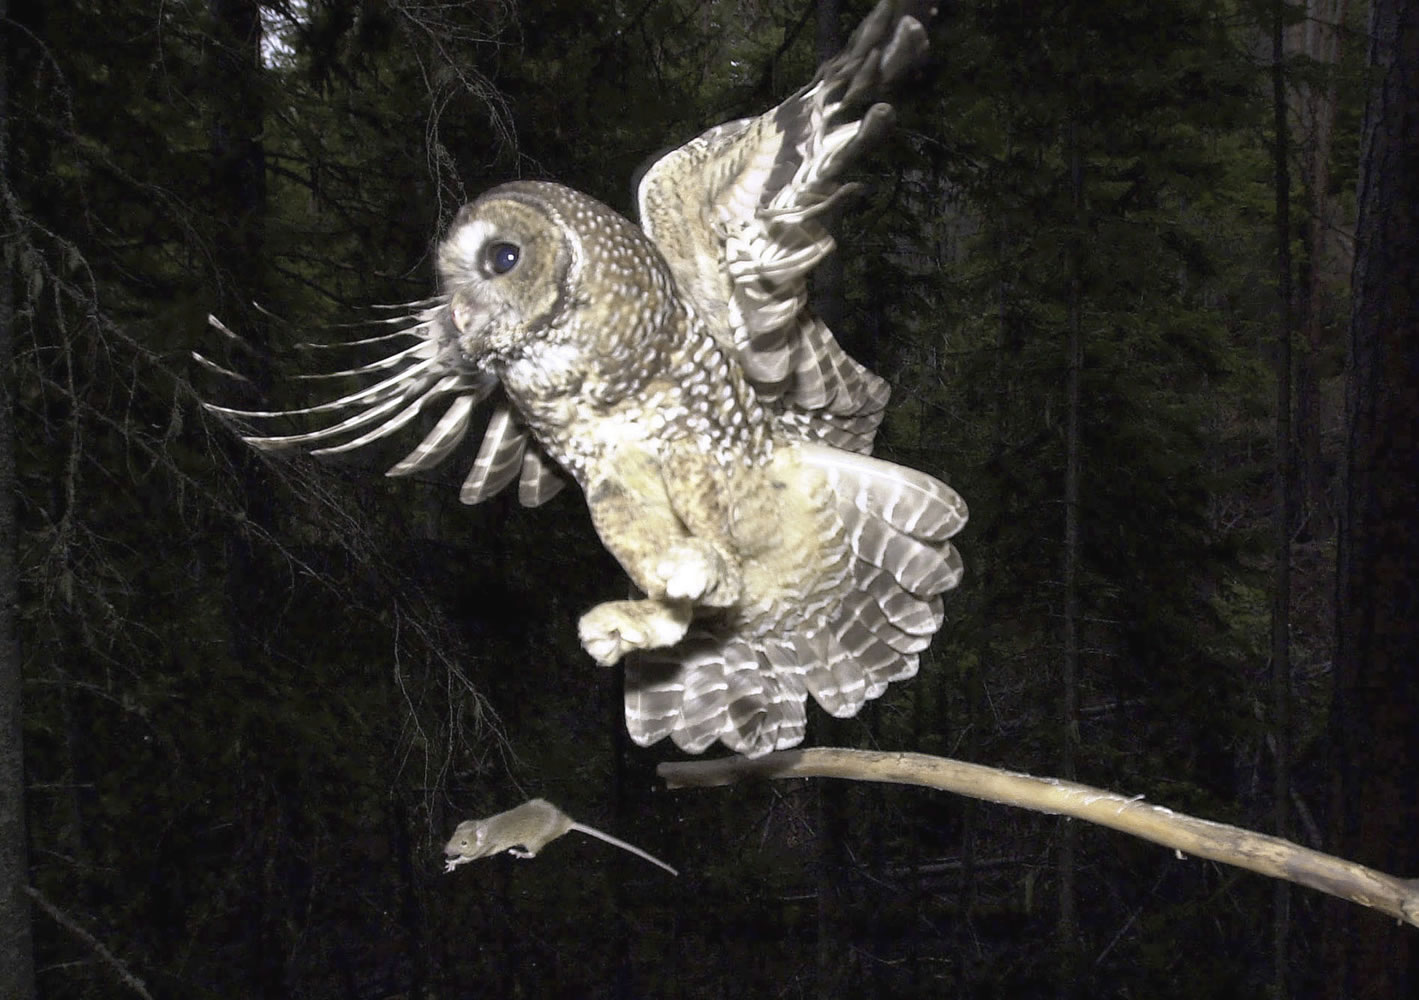 In a May 8, 2003, file photo, a northern spotted owl named Obsidian by U.S. Forest Service employees flies after an elusive mouse jumping off the end of a stick in the Deschutes National Forest near Camp Sherman, Ore.